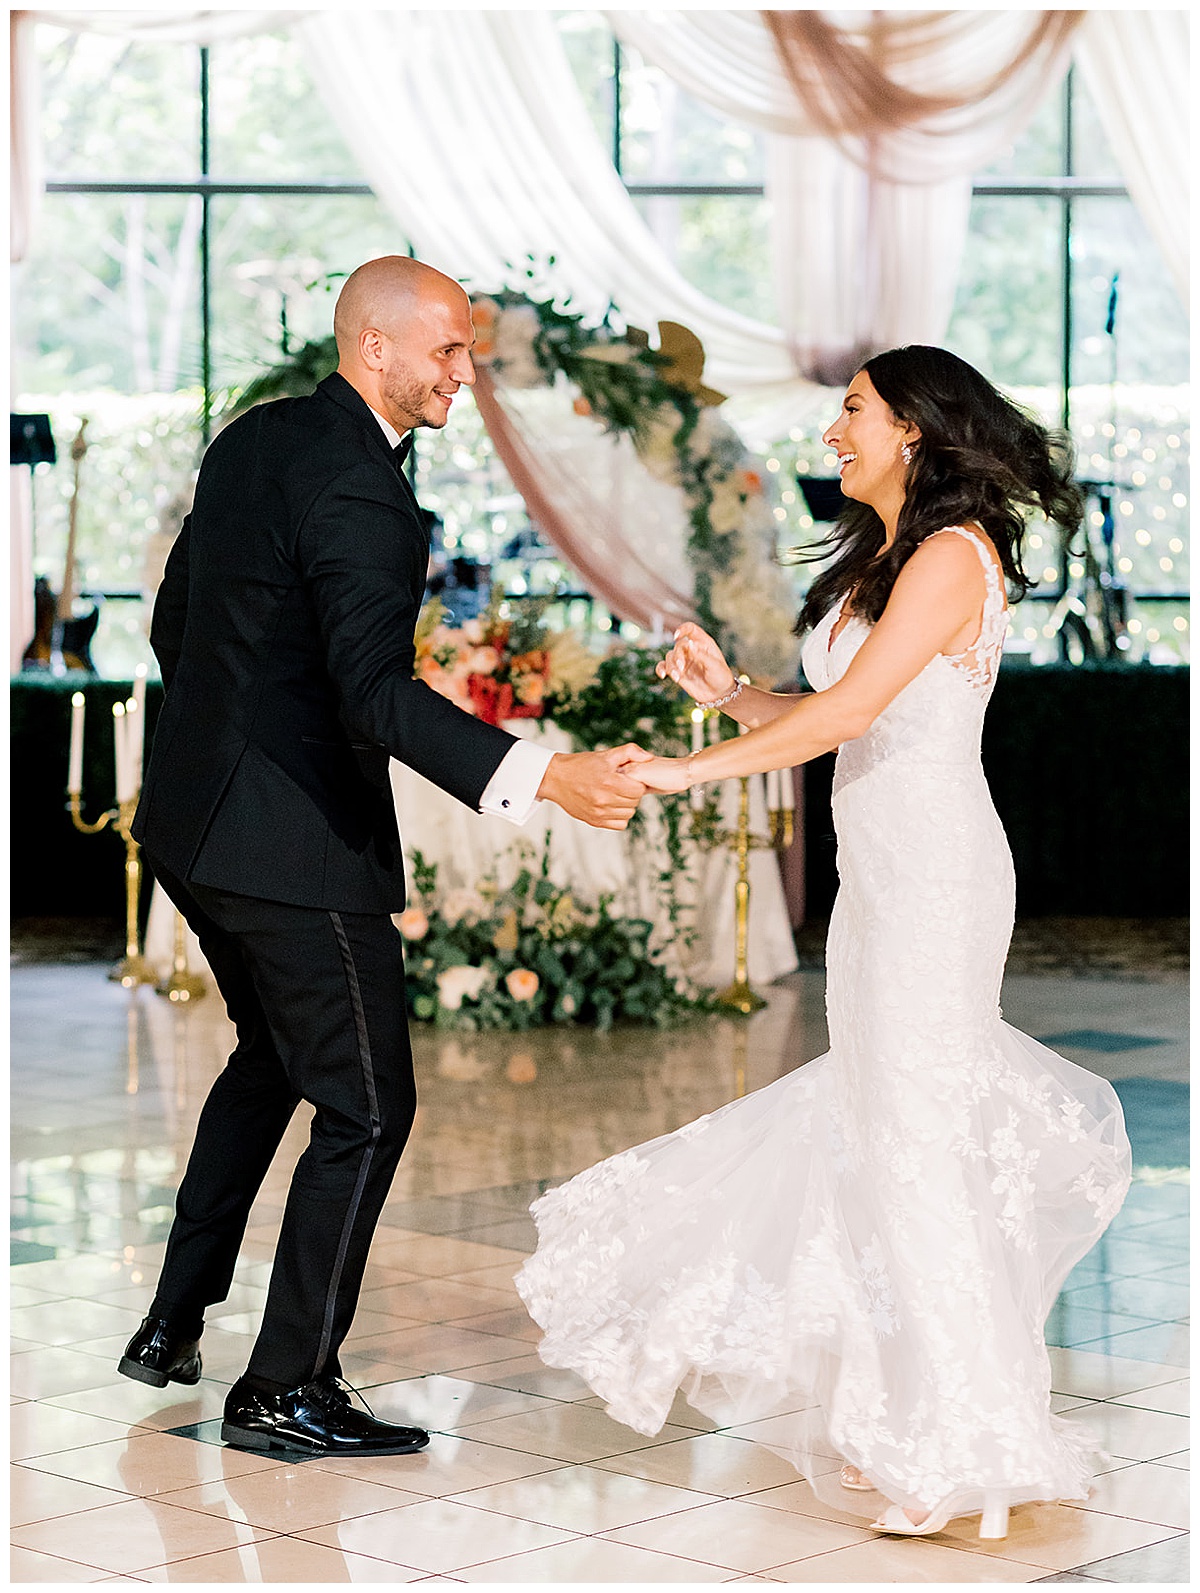 Husband and wife laugh and dance together for Kayla Bouren Photography
